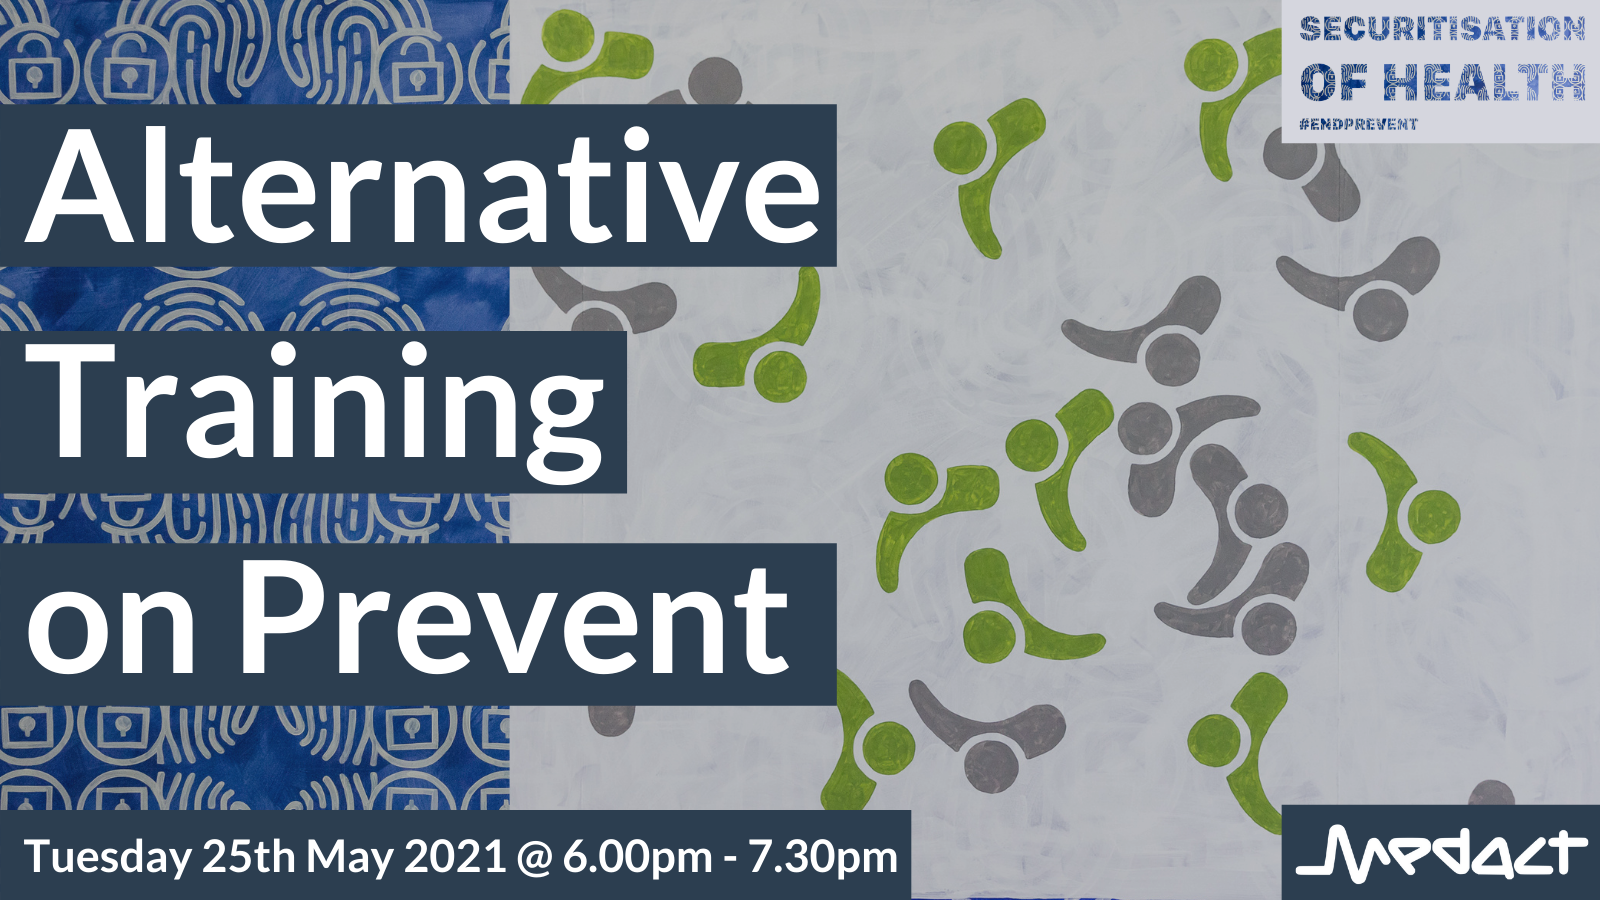 Alternative Training on Prevent - Tuesday May 25, 6-7.30pm